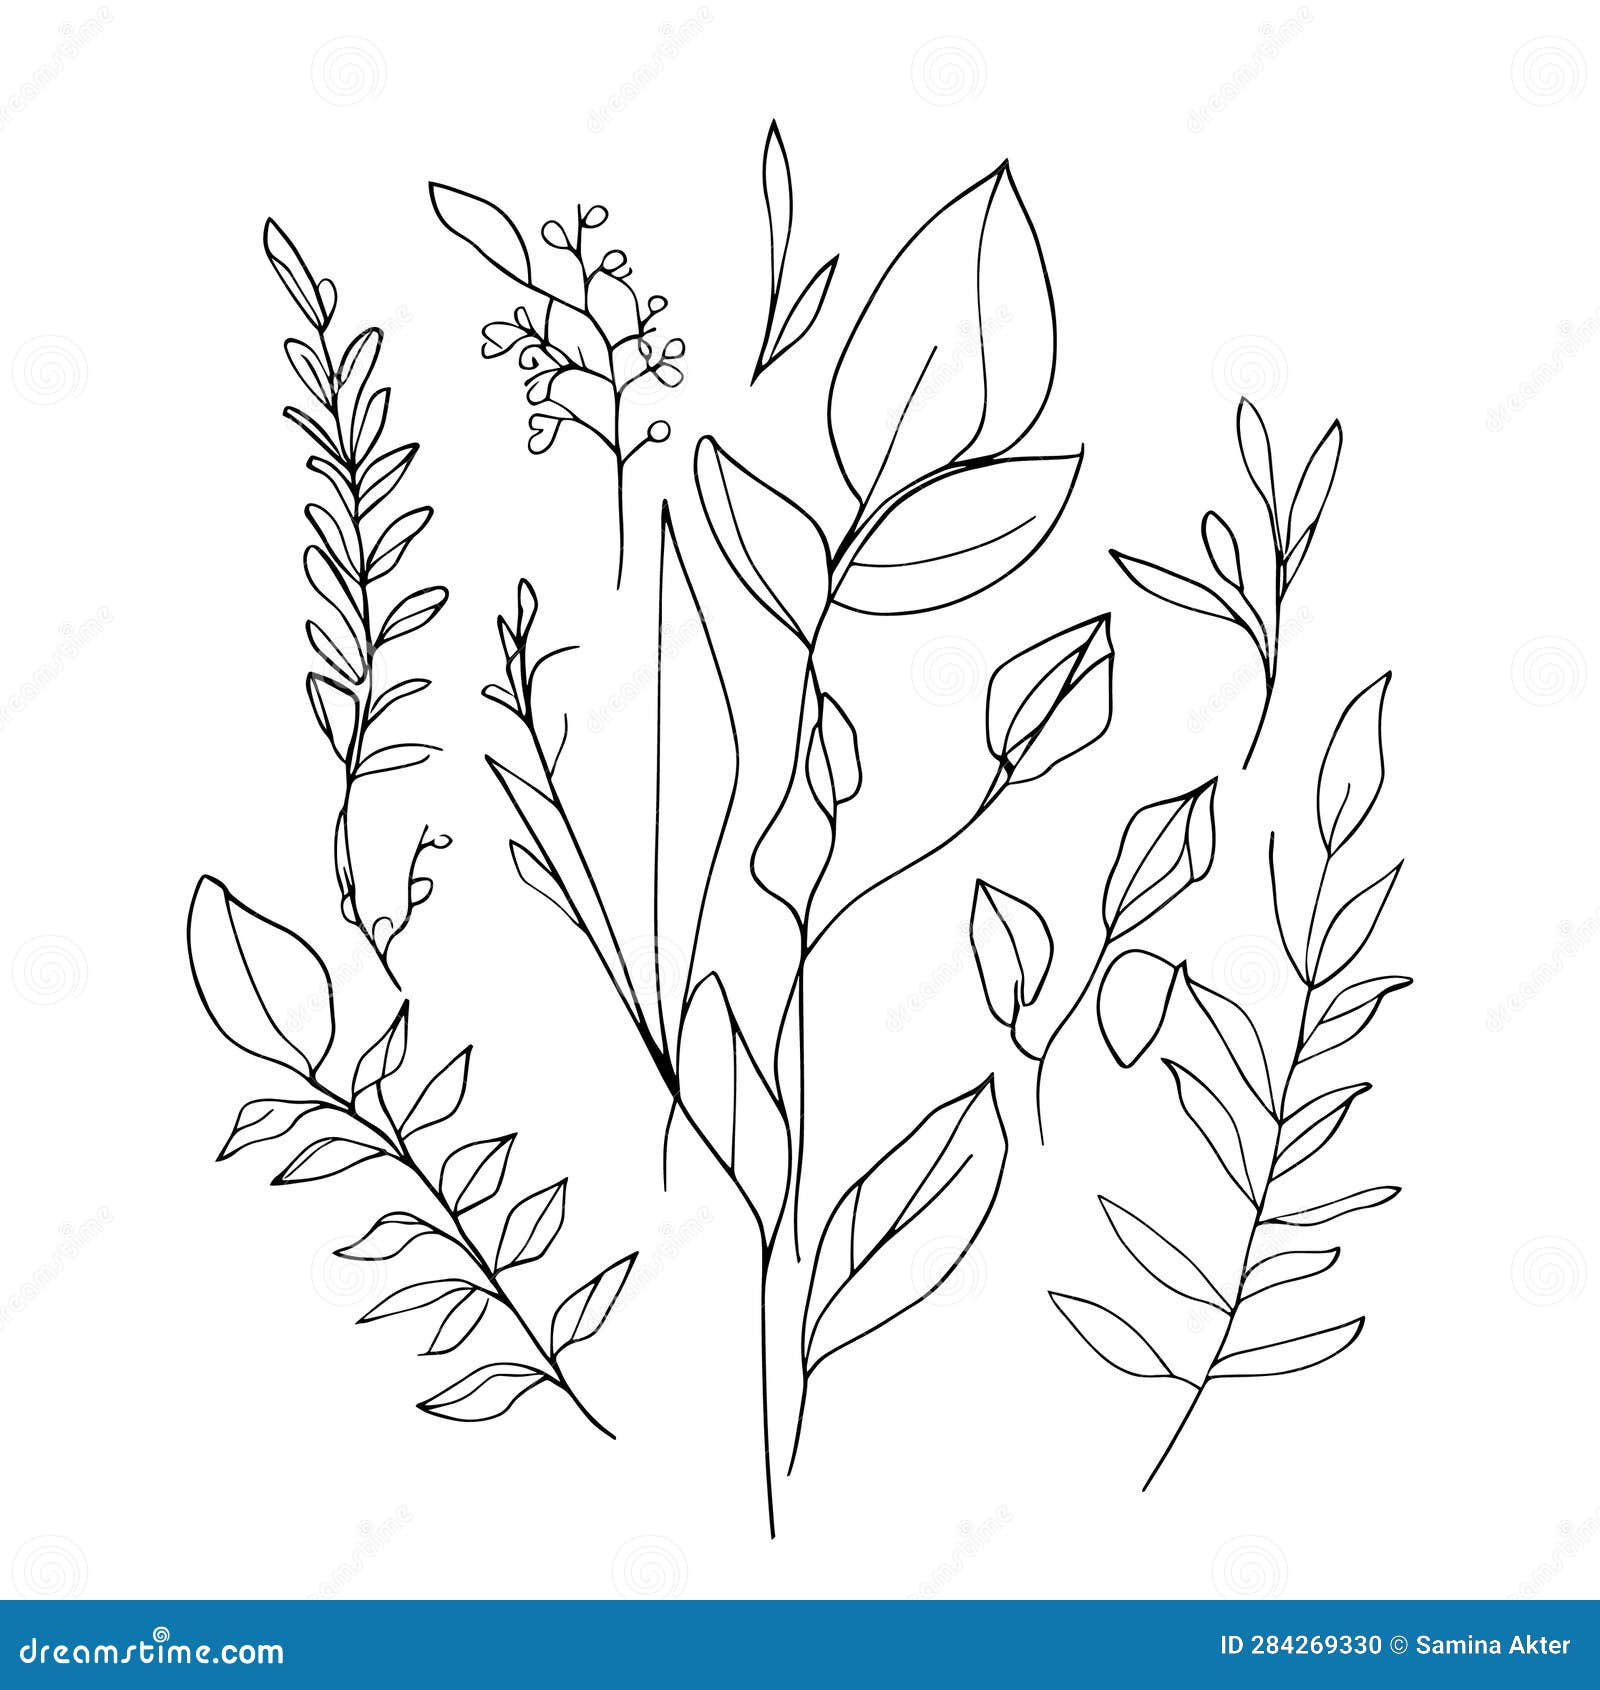 168,498 Simple Leaf Sketch Images, Stock Photos, 3D objects, & Vectors |  Shutterstock